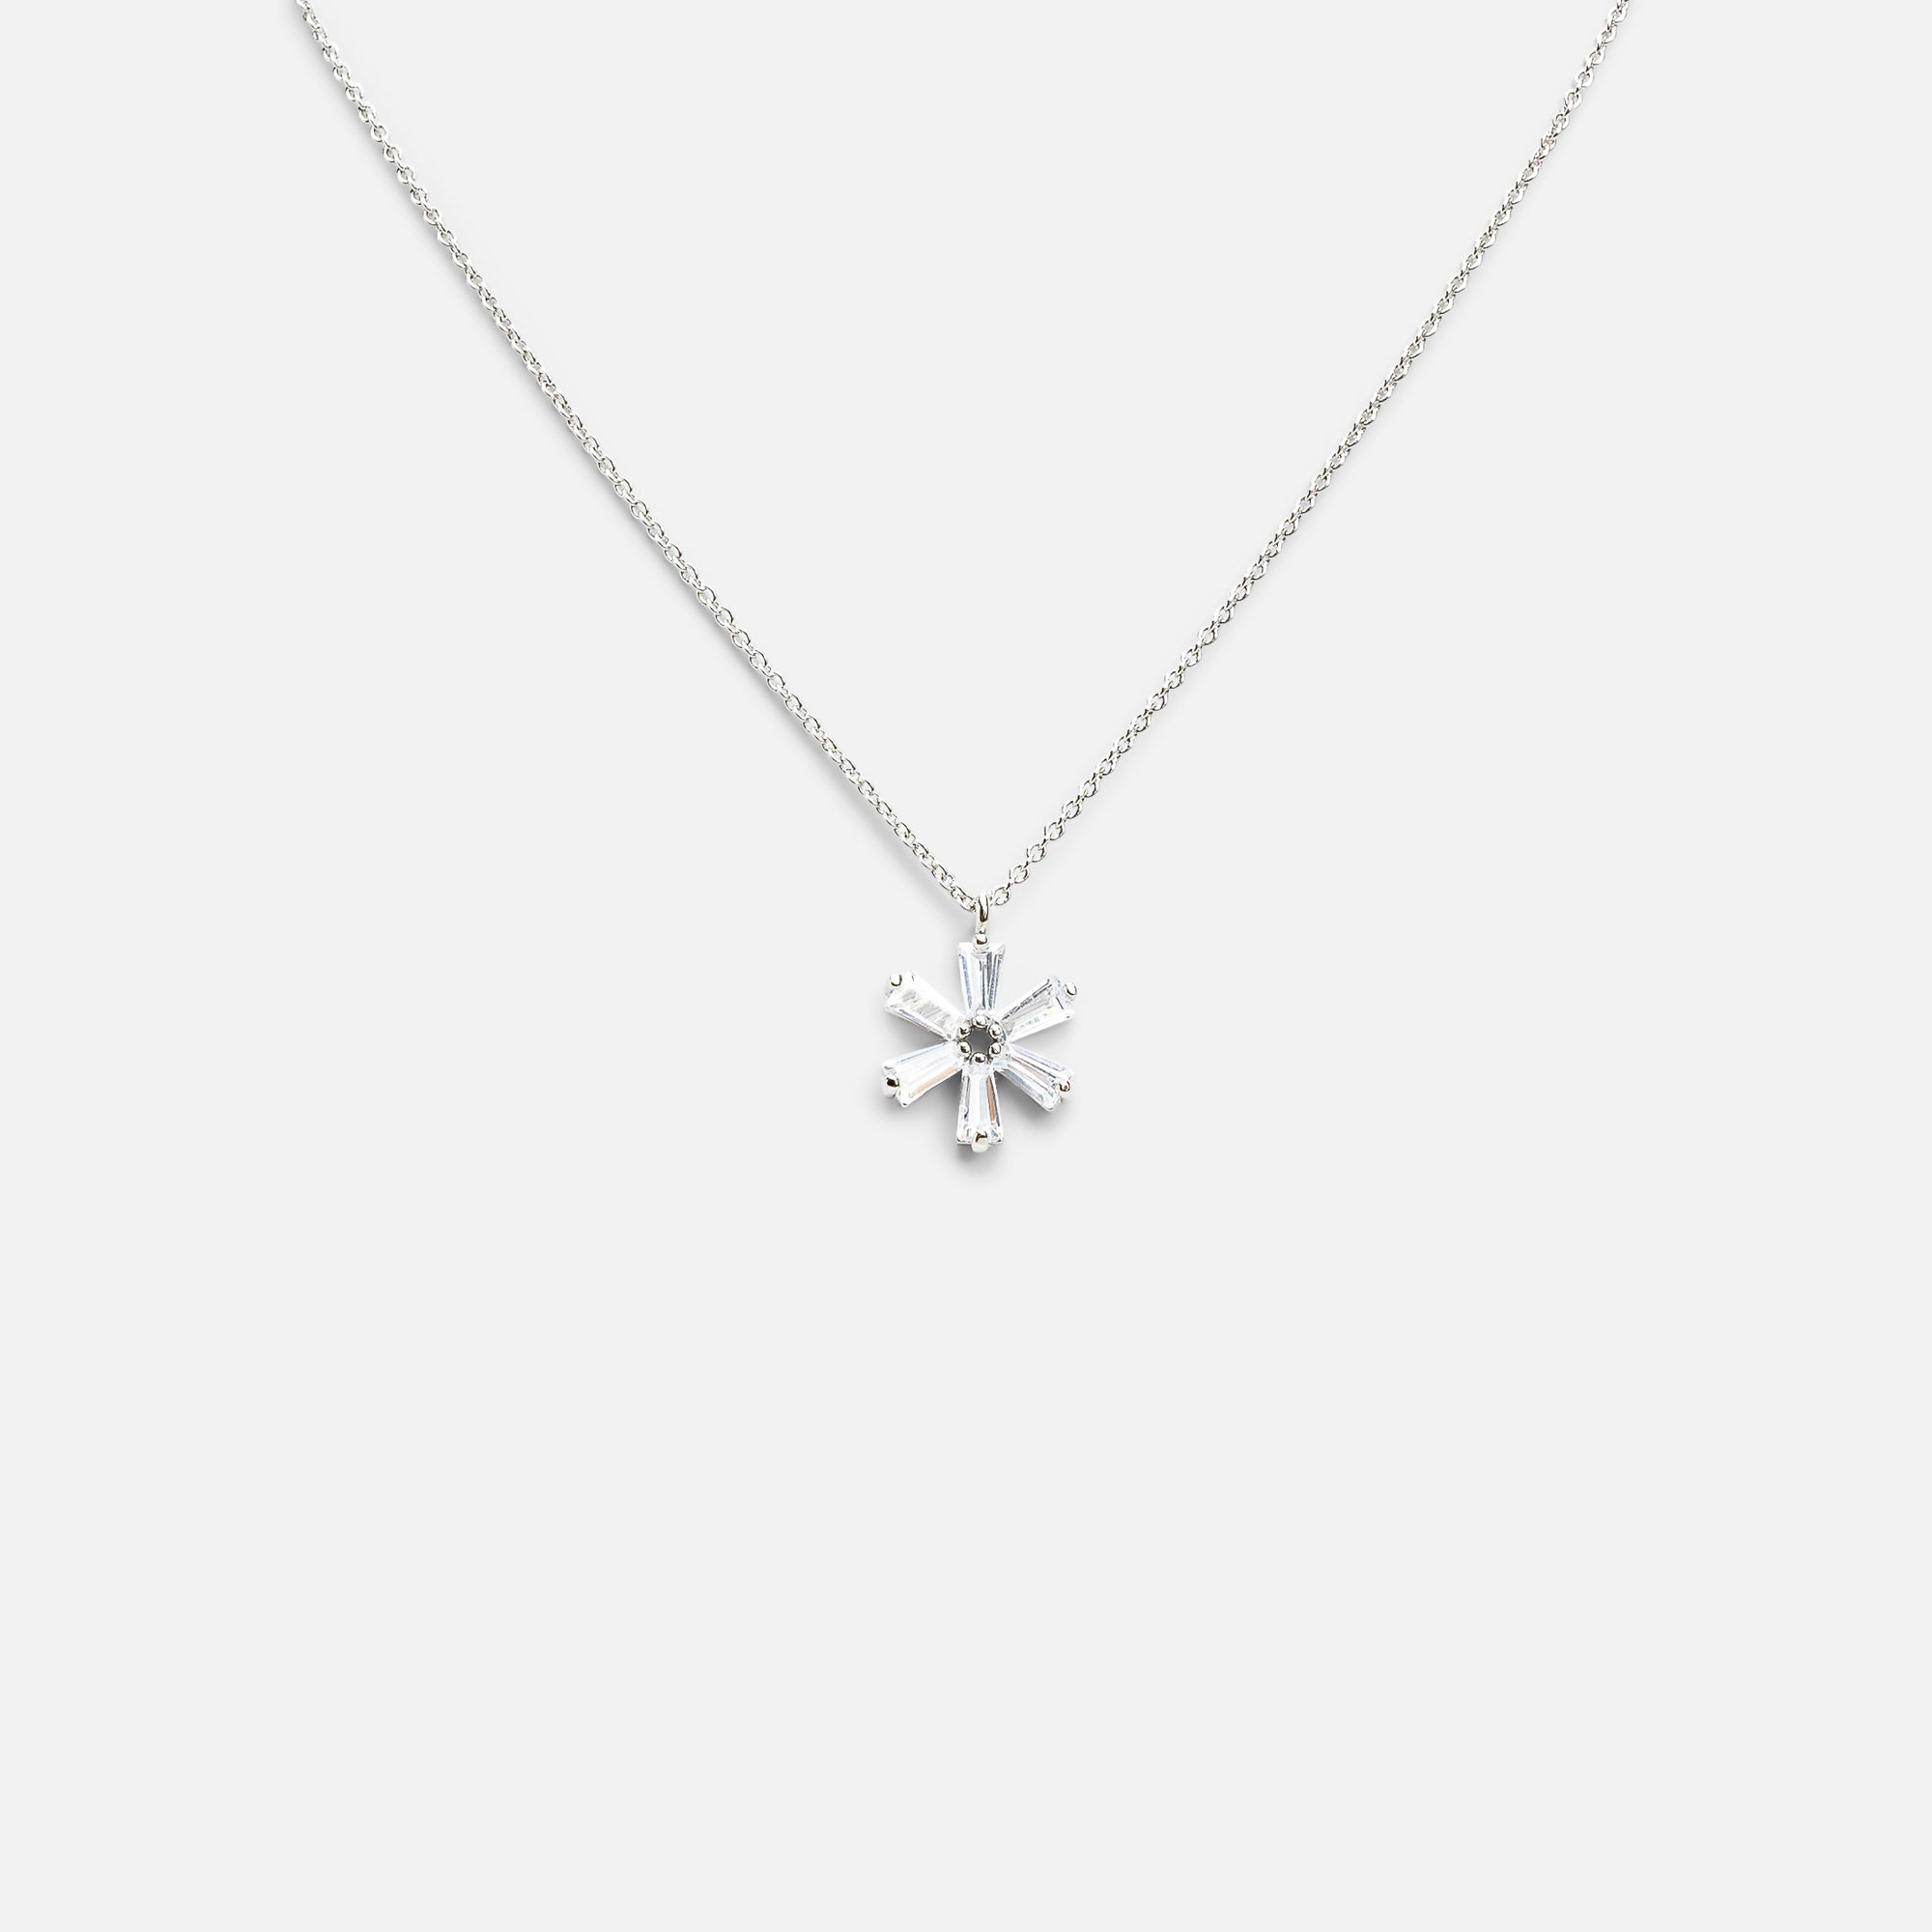 Silver pendant with small flower